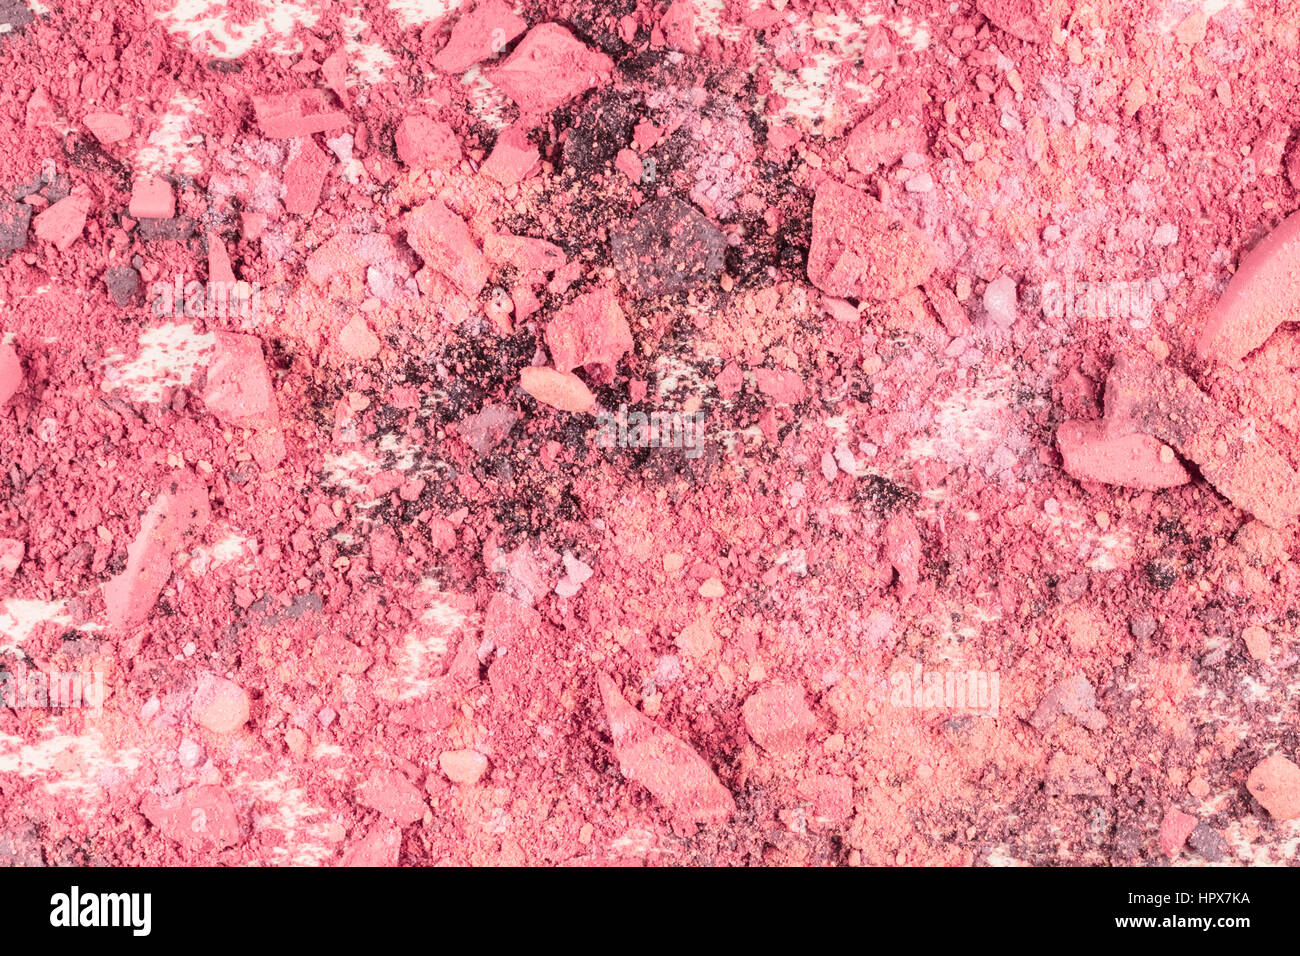 Abstract background texture with vibrant pink makeup powder, shot from above Stock Photo